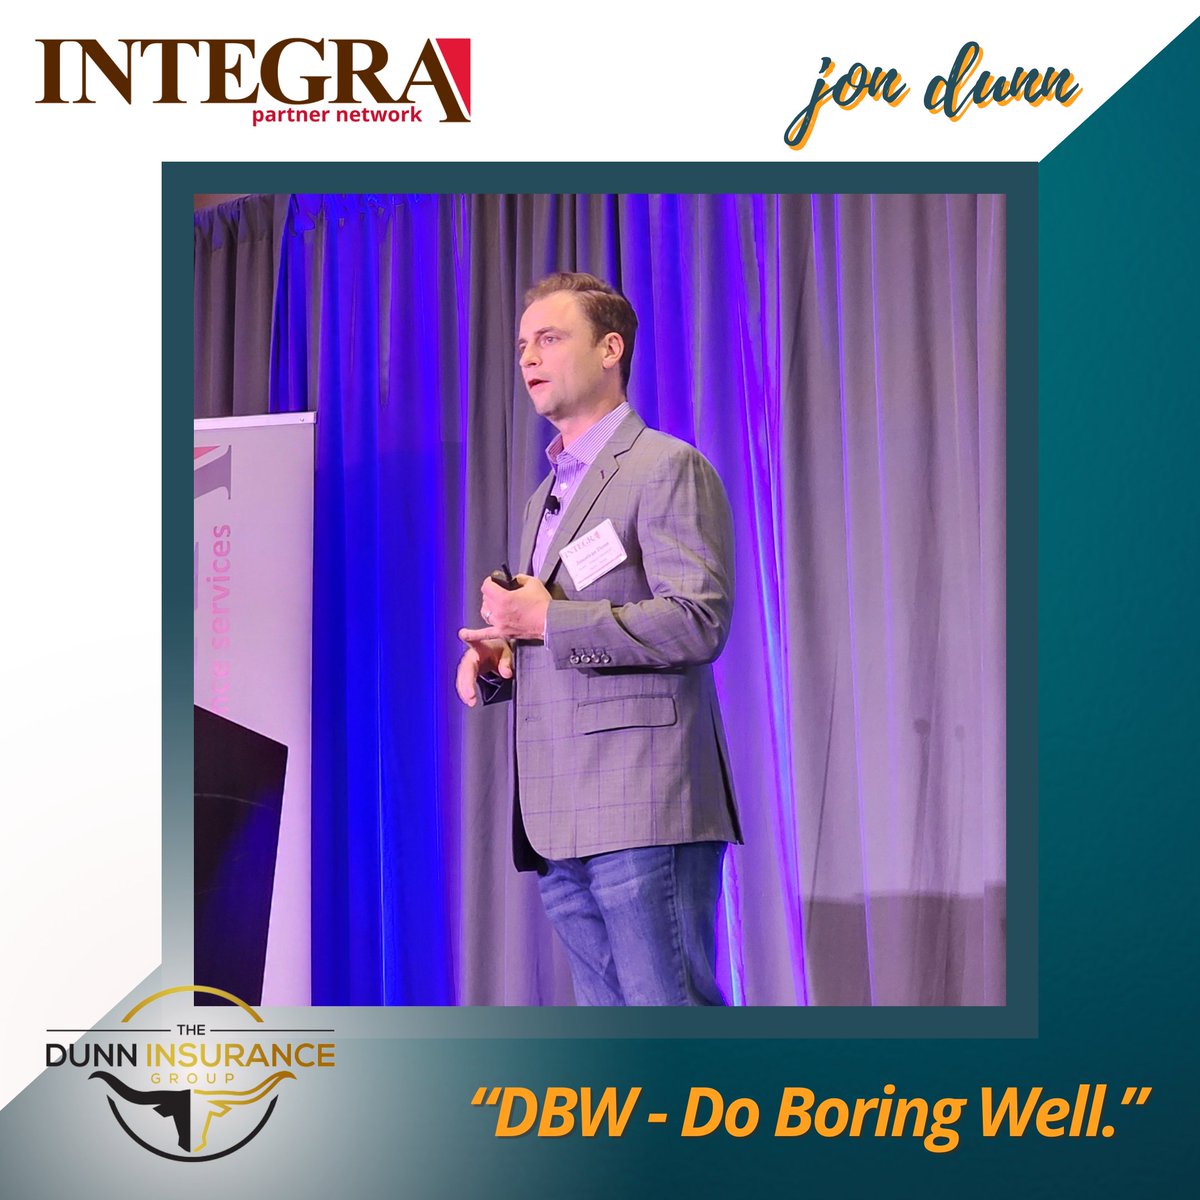 Jon Dunn of The Dunn Insurance Group dropped the term DBW on us - Do Boring Well - during his sessions at the Integra Partner Network Conference. Thanks for sharing your expertise on lead generation and creating strong lead partners.

#insurance #insuranceagent #independentagent